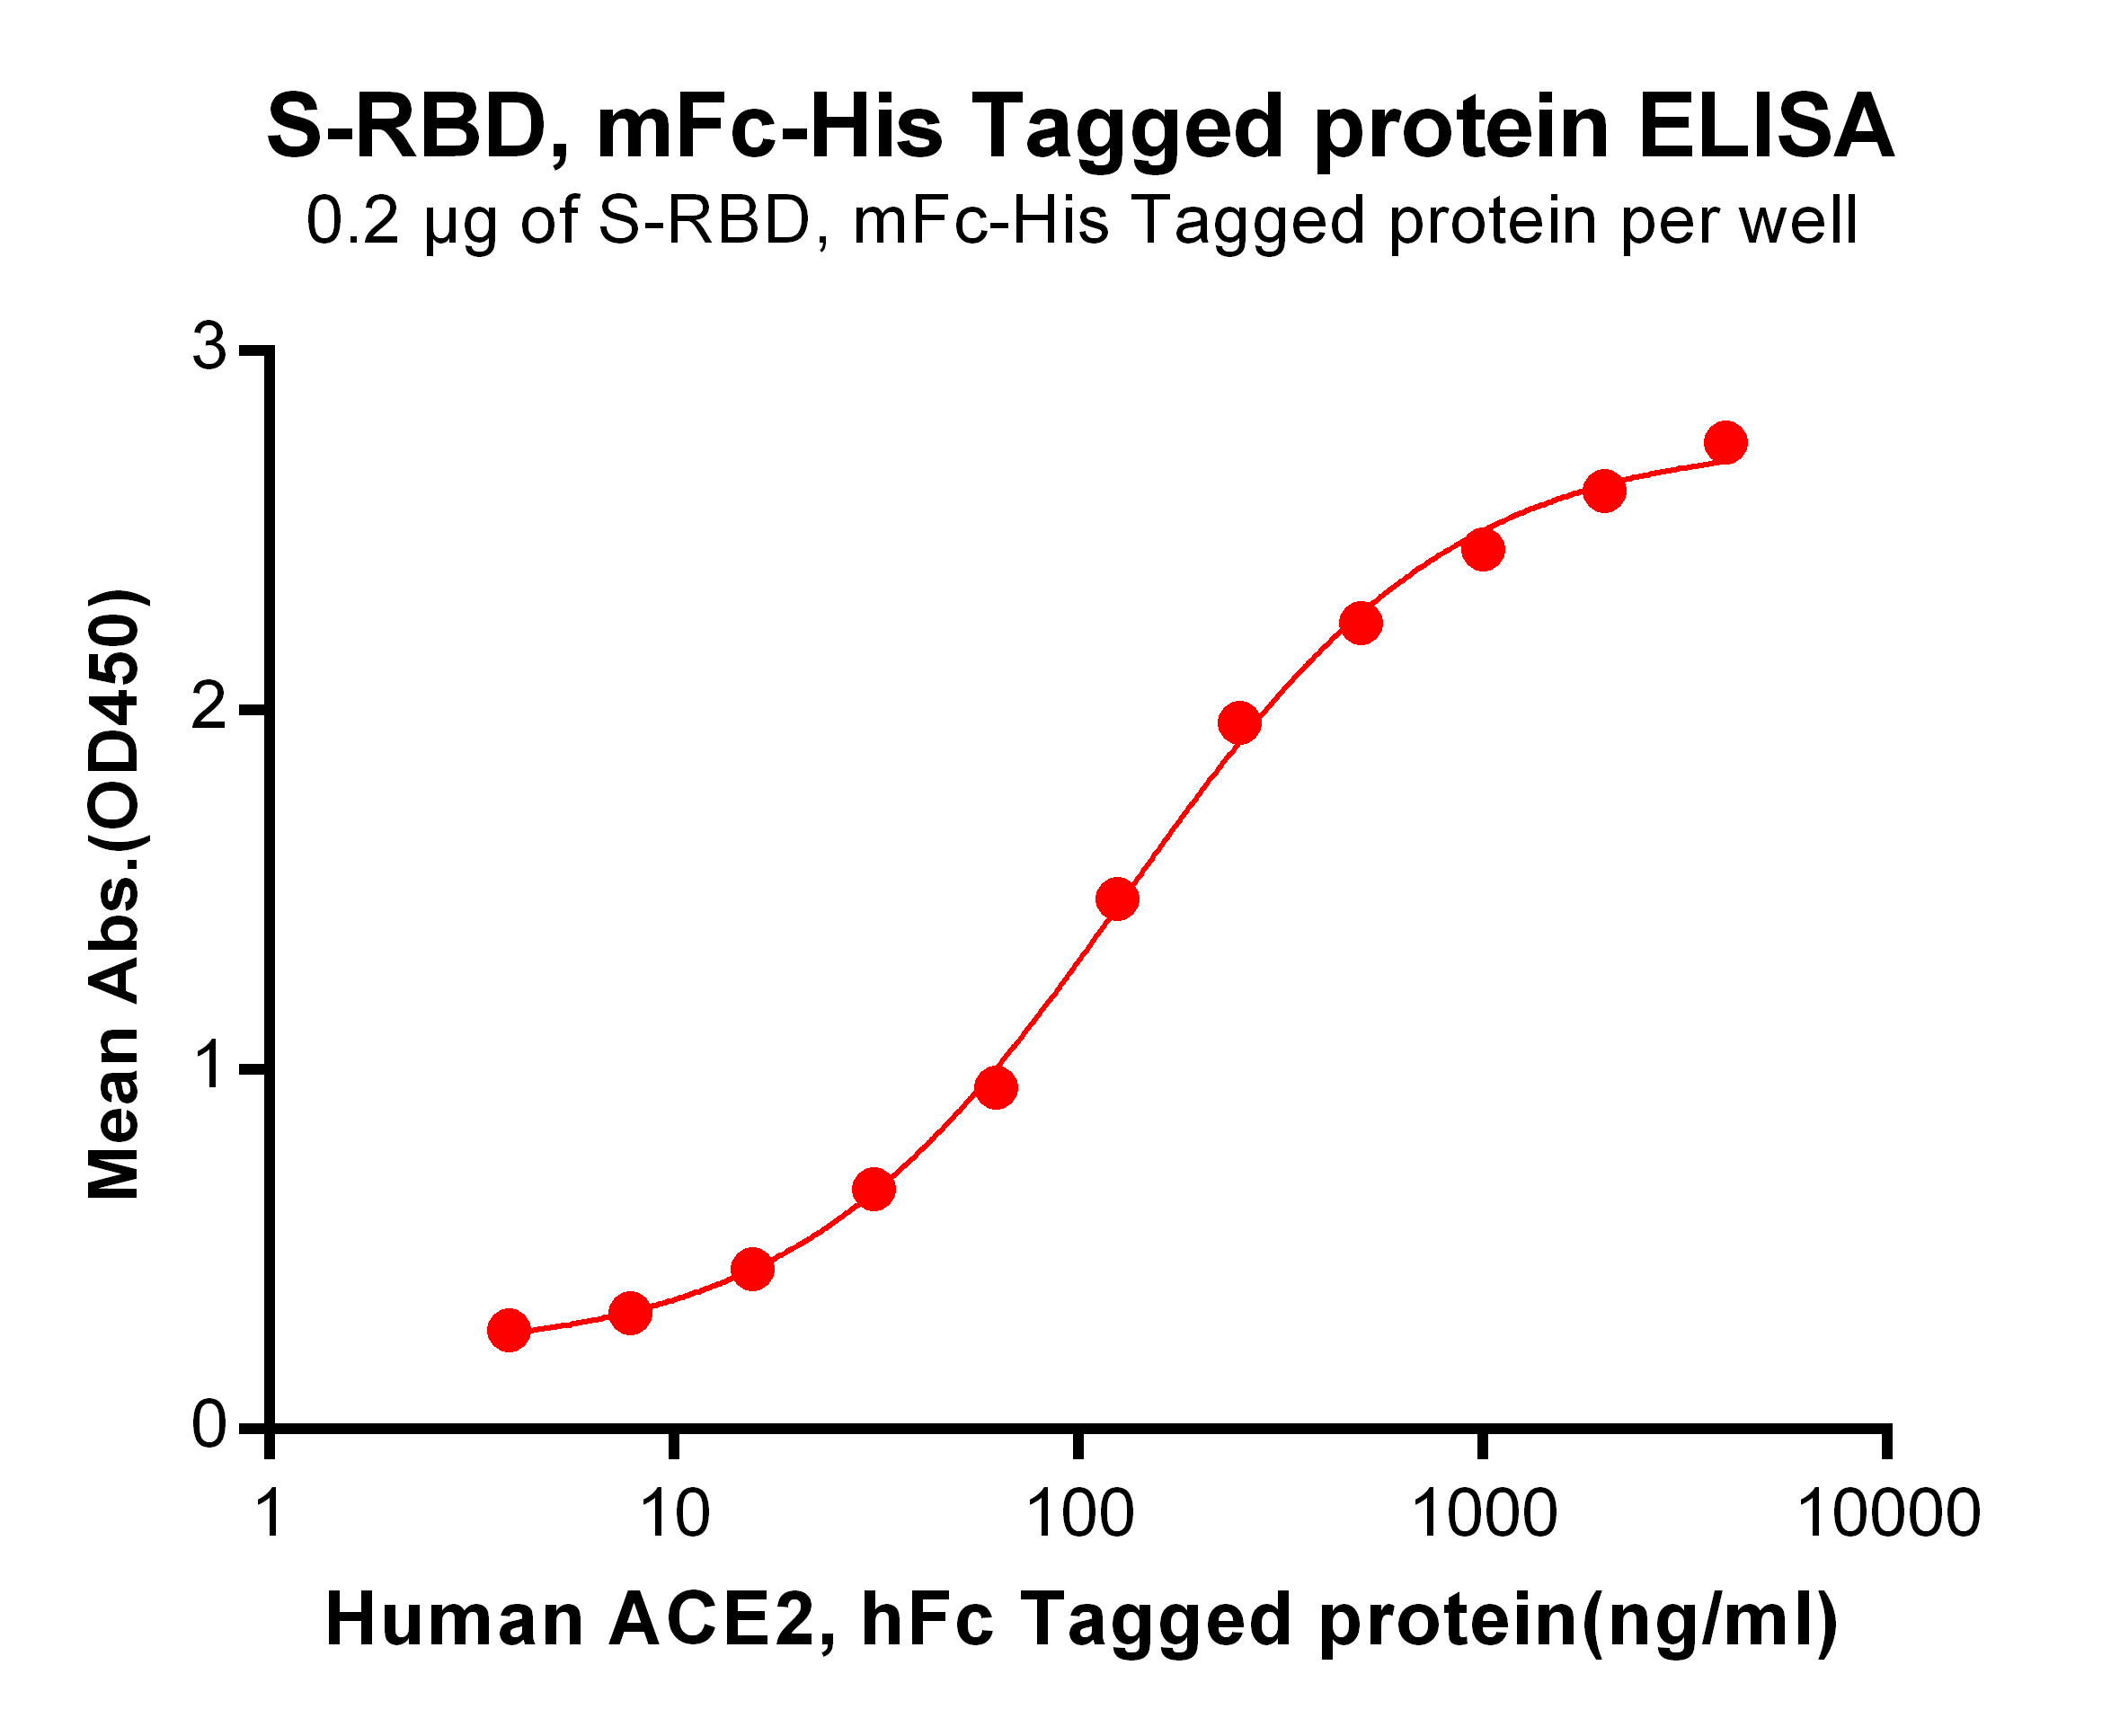 PME100460-ELISA-RBD-mFc-His-Fig4.png